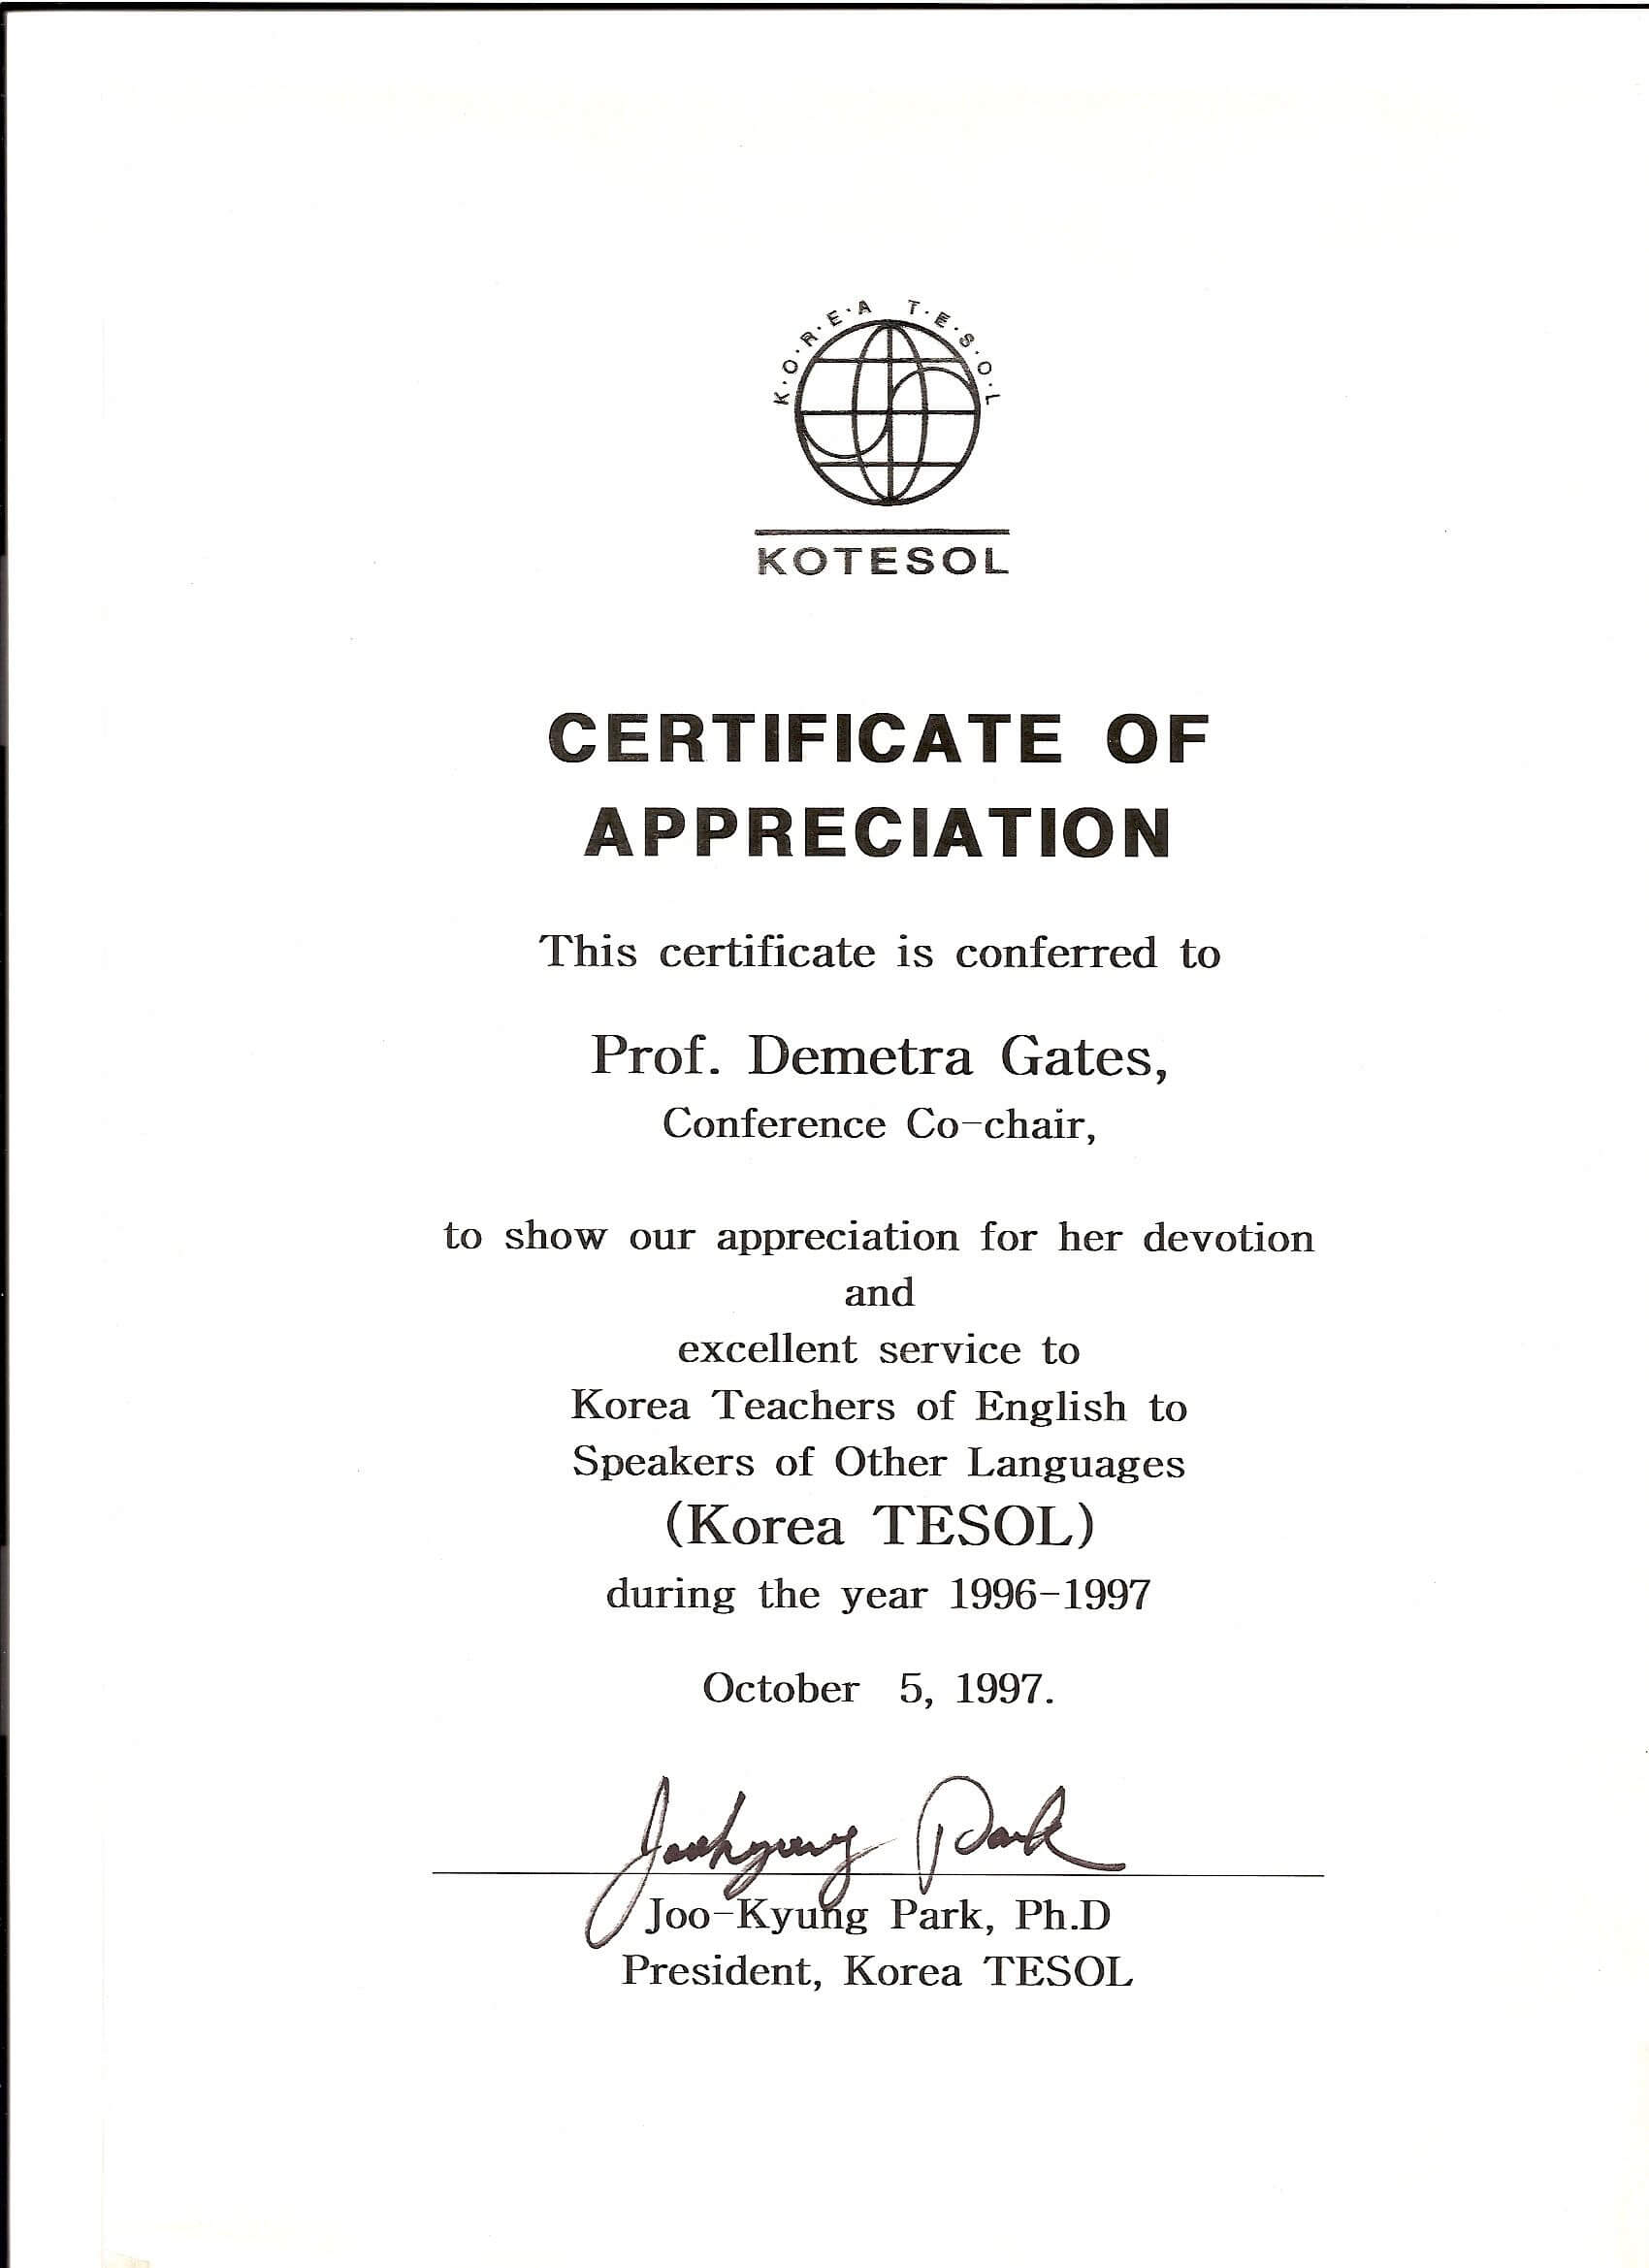 Kotesol Presidential Certificate Of Appreciation (1997 With Regard To Certificate Of Achievement Army Template